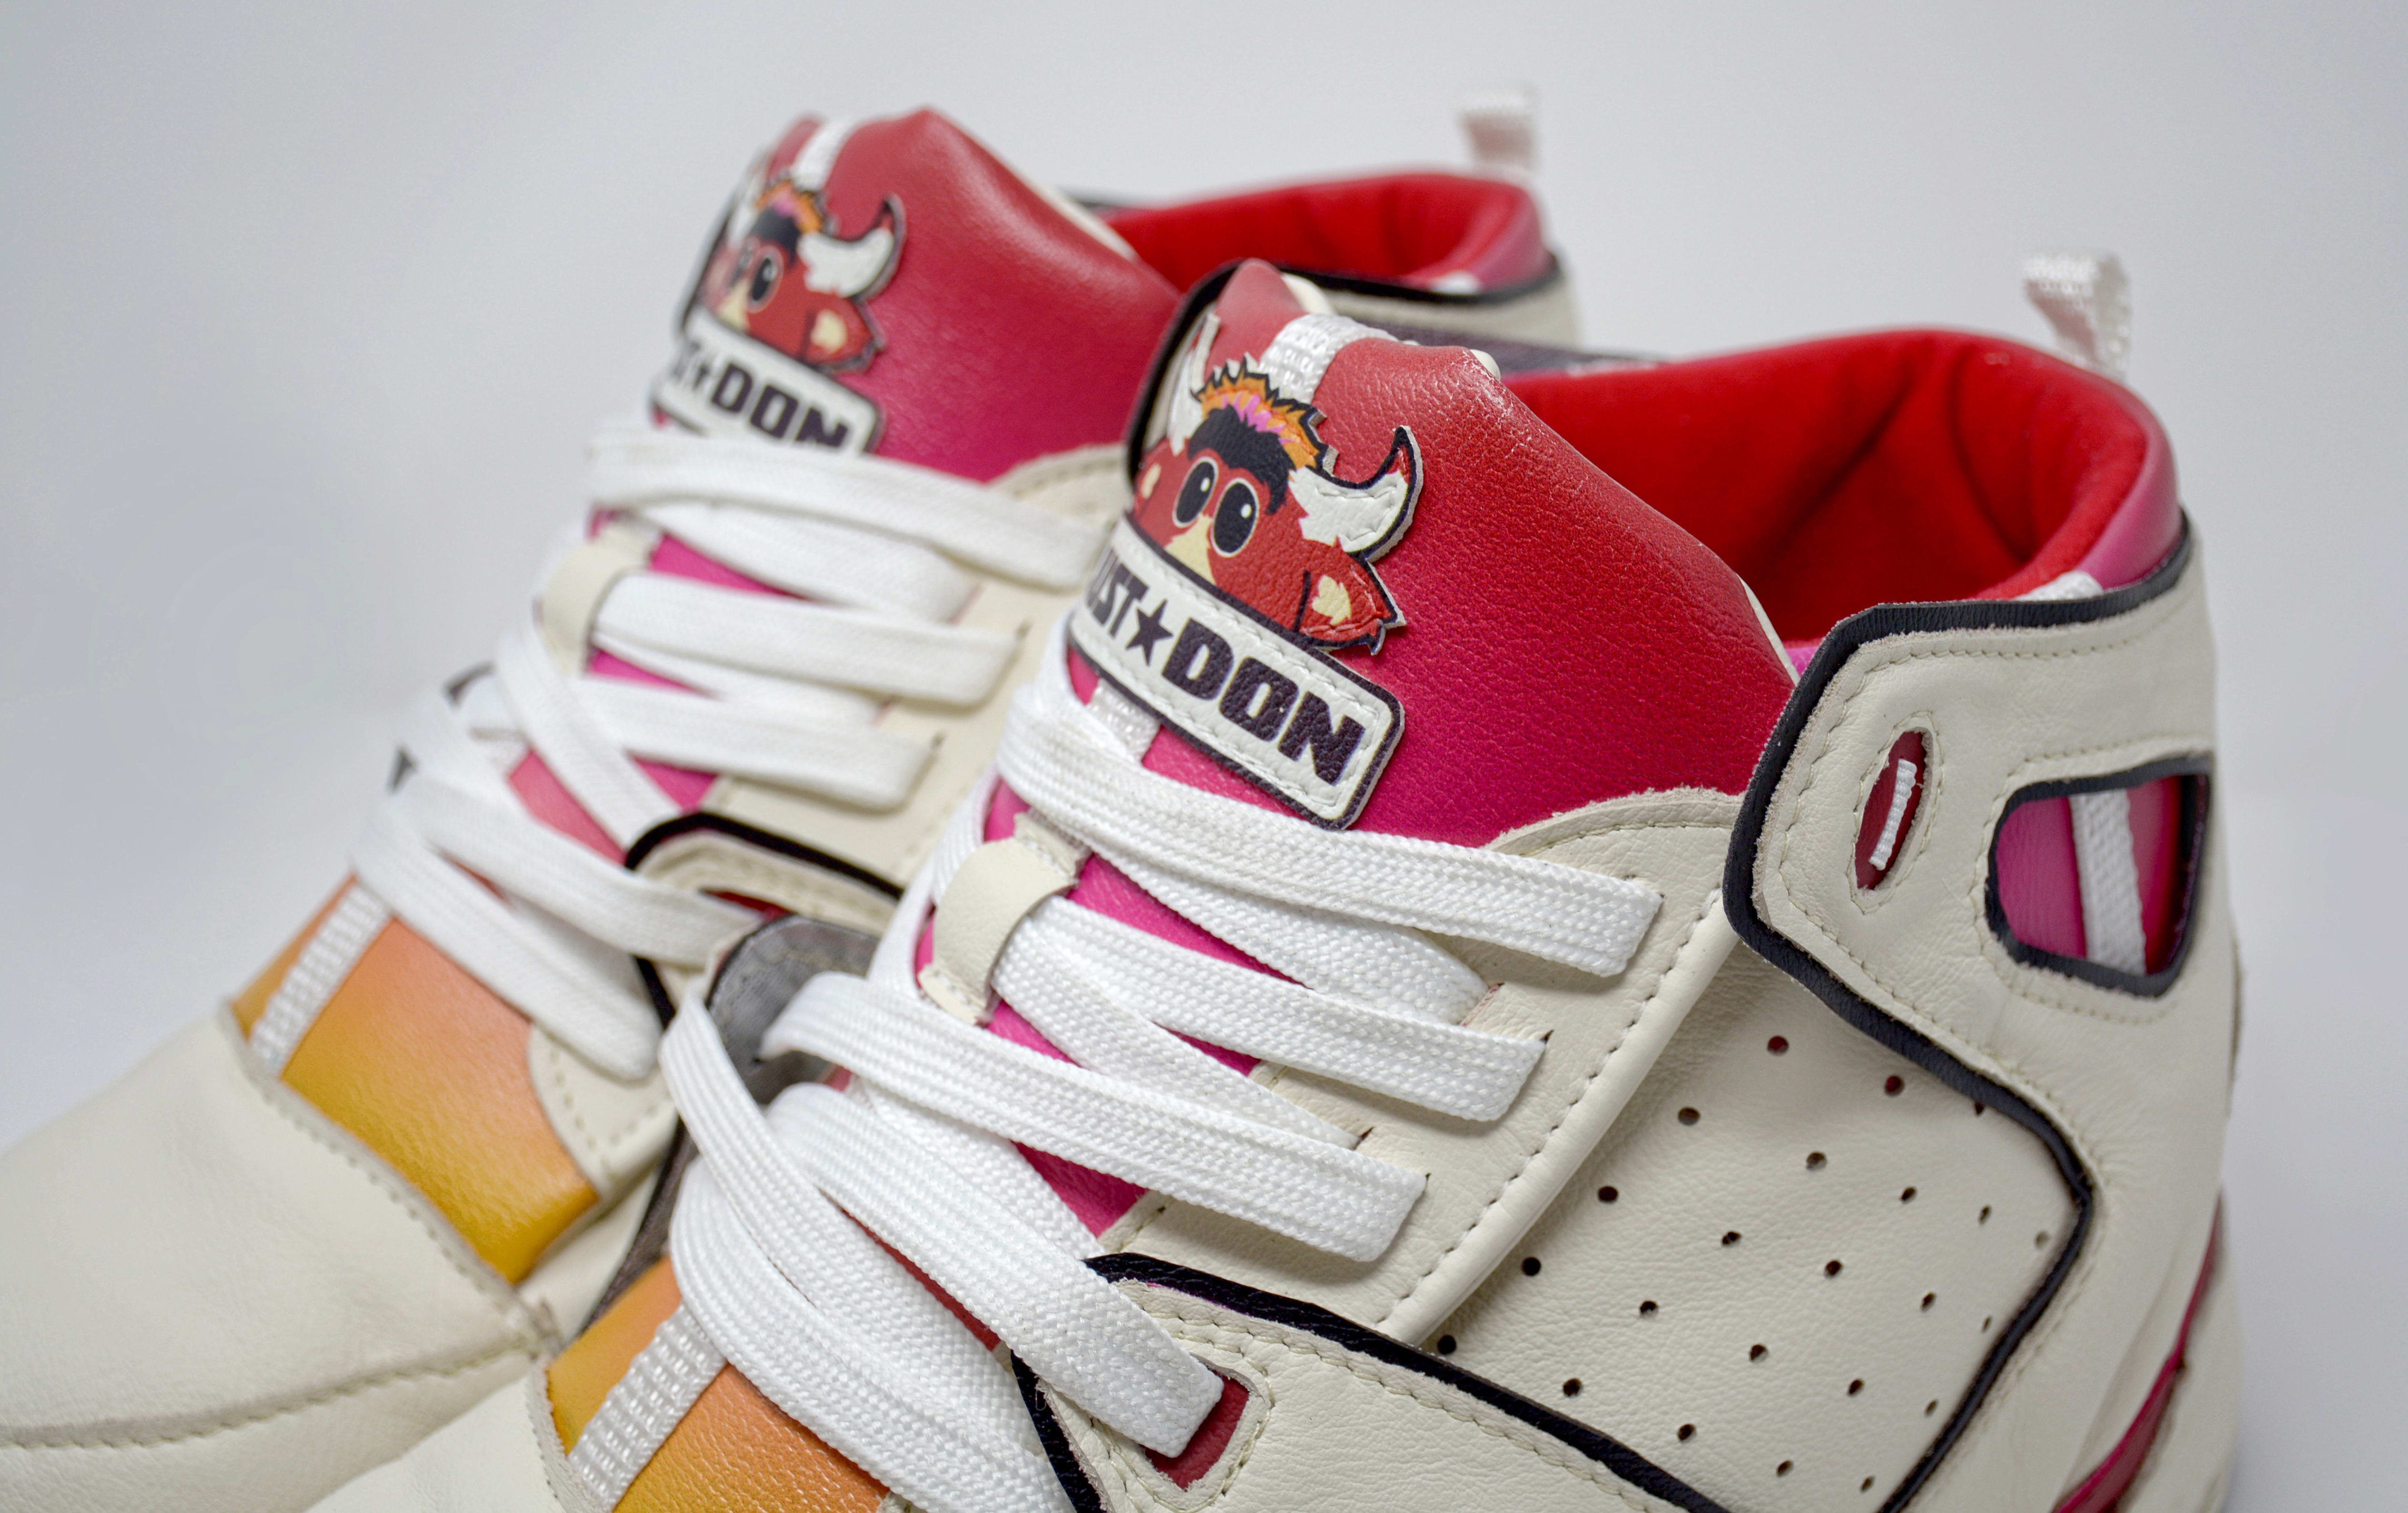 Don C Designed a Sneaker for an NBA Mascot That You'd Actually Want to Wear